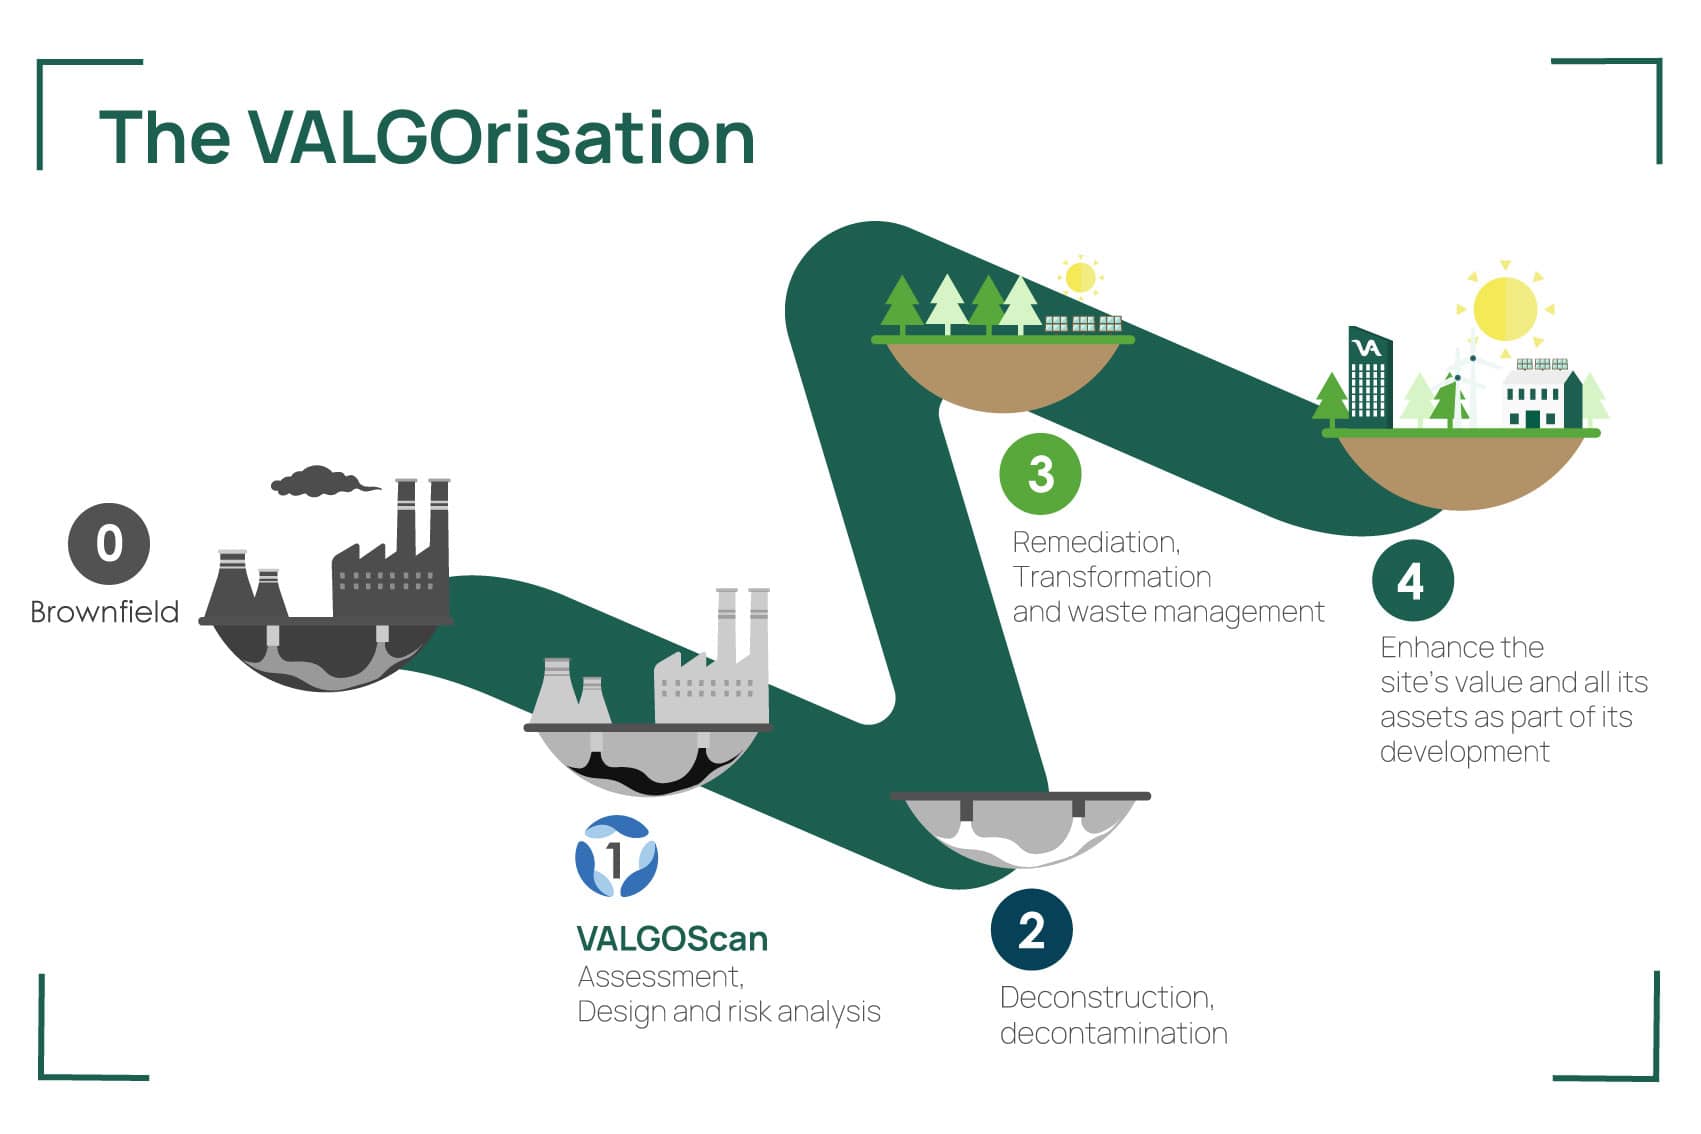 VALGO, a unique model for the depollution of polluted sites and soils